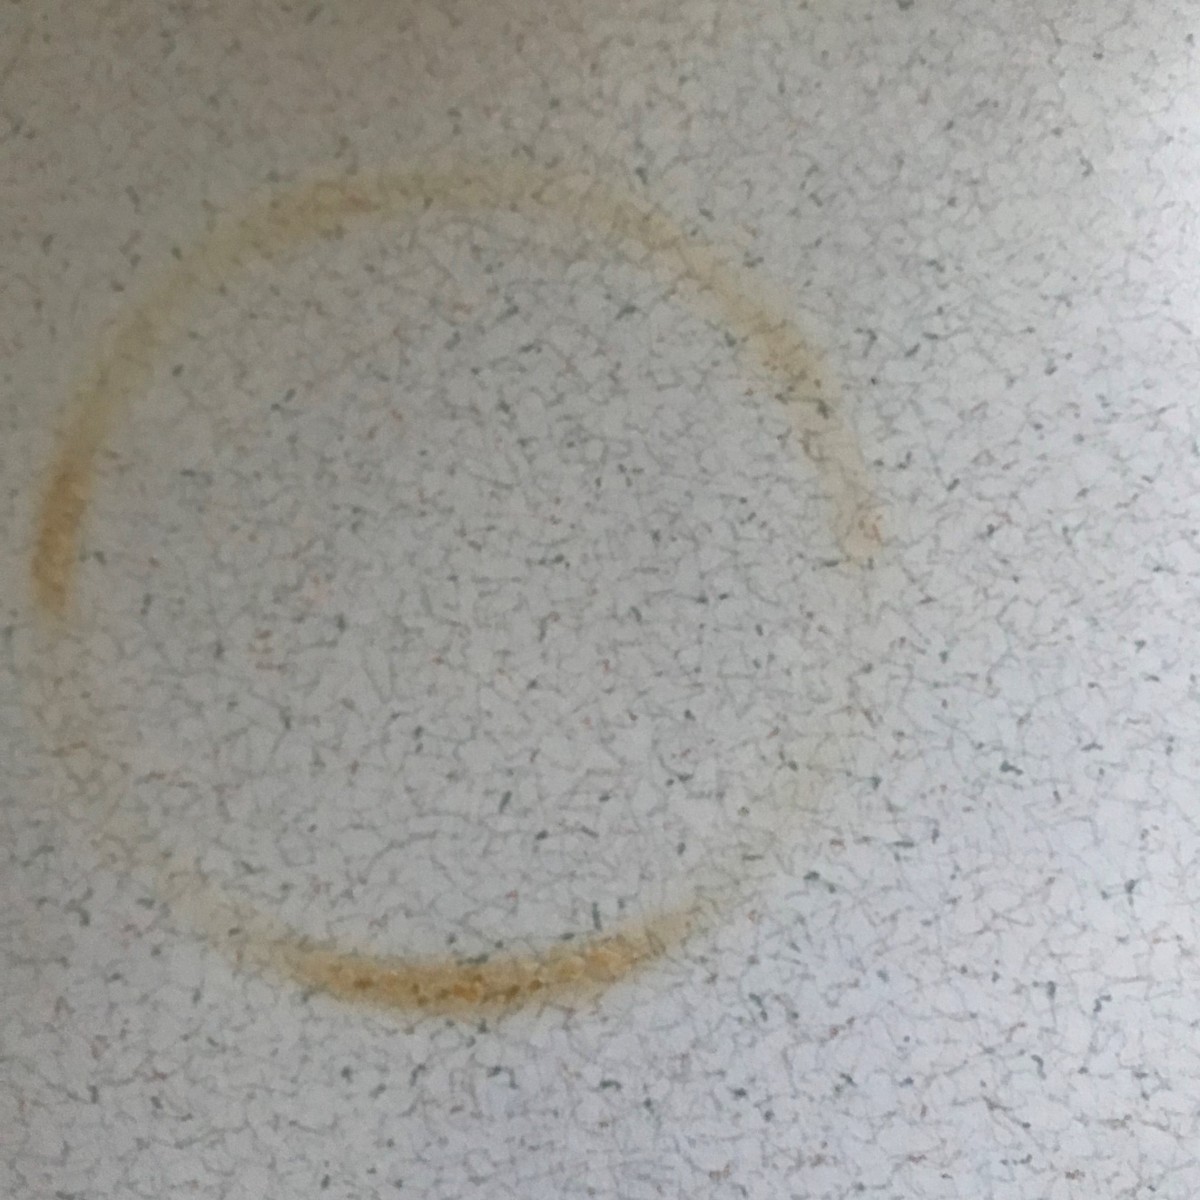 Removing a Burn Mark on a Formica Countertop? | ThriftyFun